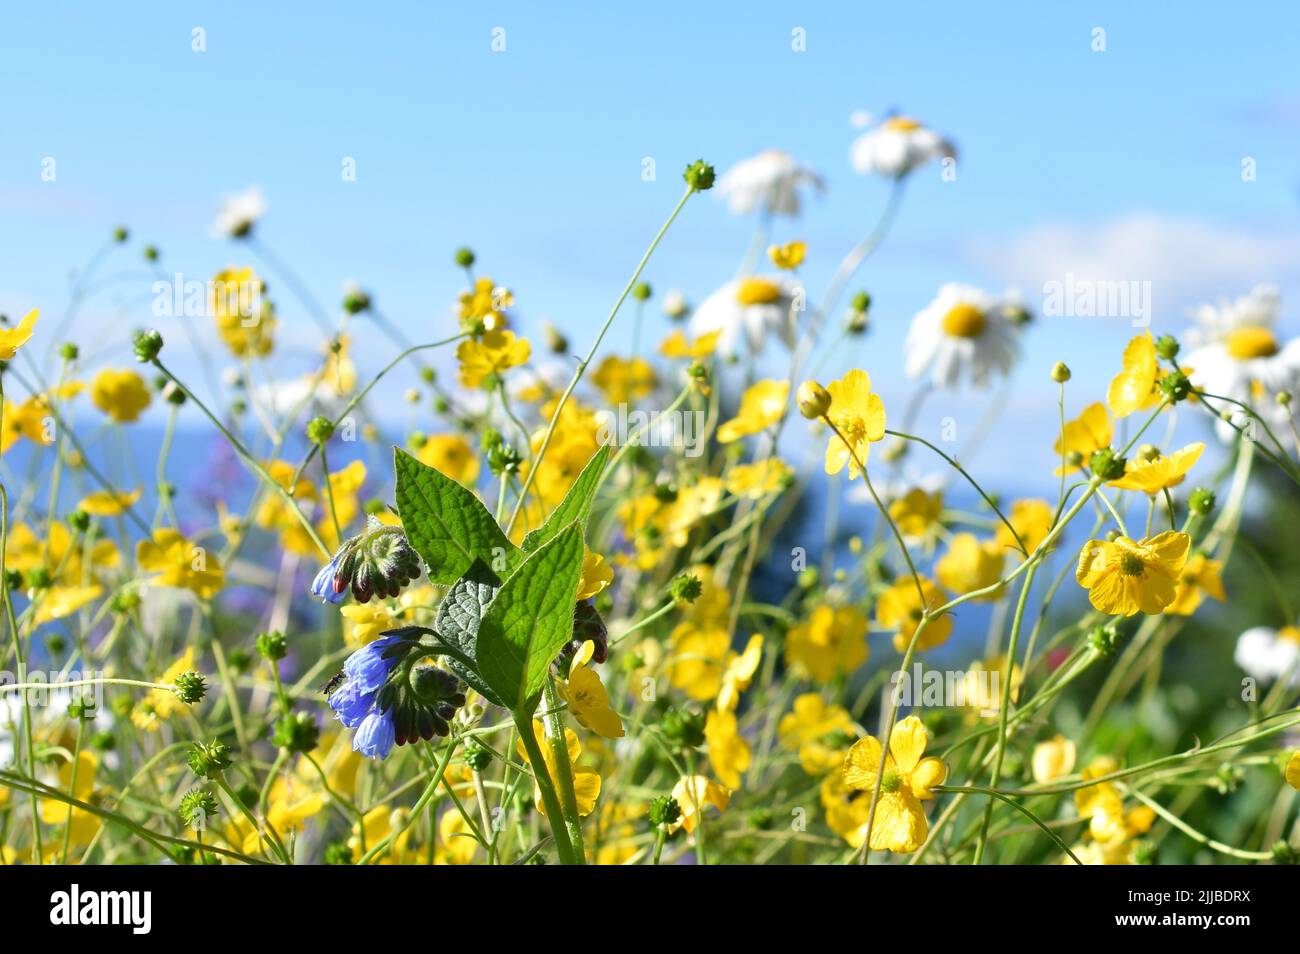 Field of different wildflowers in different colors against blue sky Stock Photo